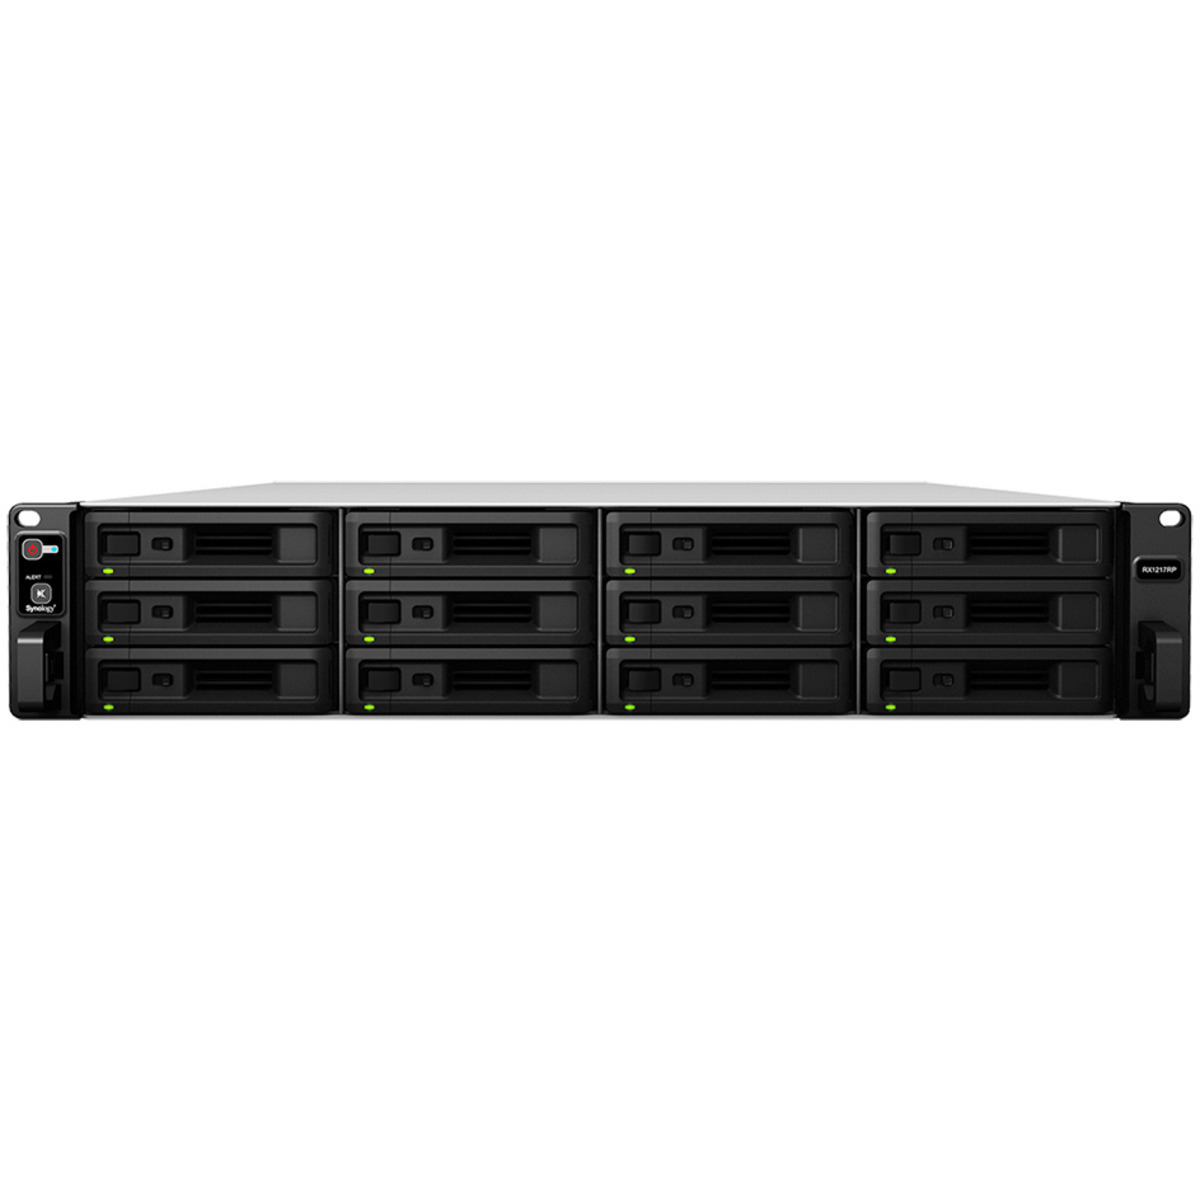 buy $6935 Synology RX1217 216tb RackMount Expansion Enclosure 12x18000gb Toshiba Enterprise Capacity MG09ACA18TE 3.5 7200rpm SATA 6Gb/s HDD ENTERPRISE Class Drives Installed - Burn-In Tested - nas headquarters buy network attached storage server device das new raid-5 free shipping usa christmas new year holiday sale RX1217